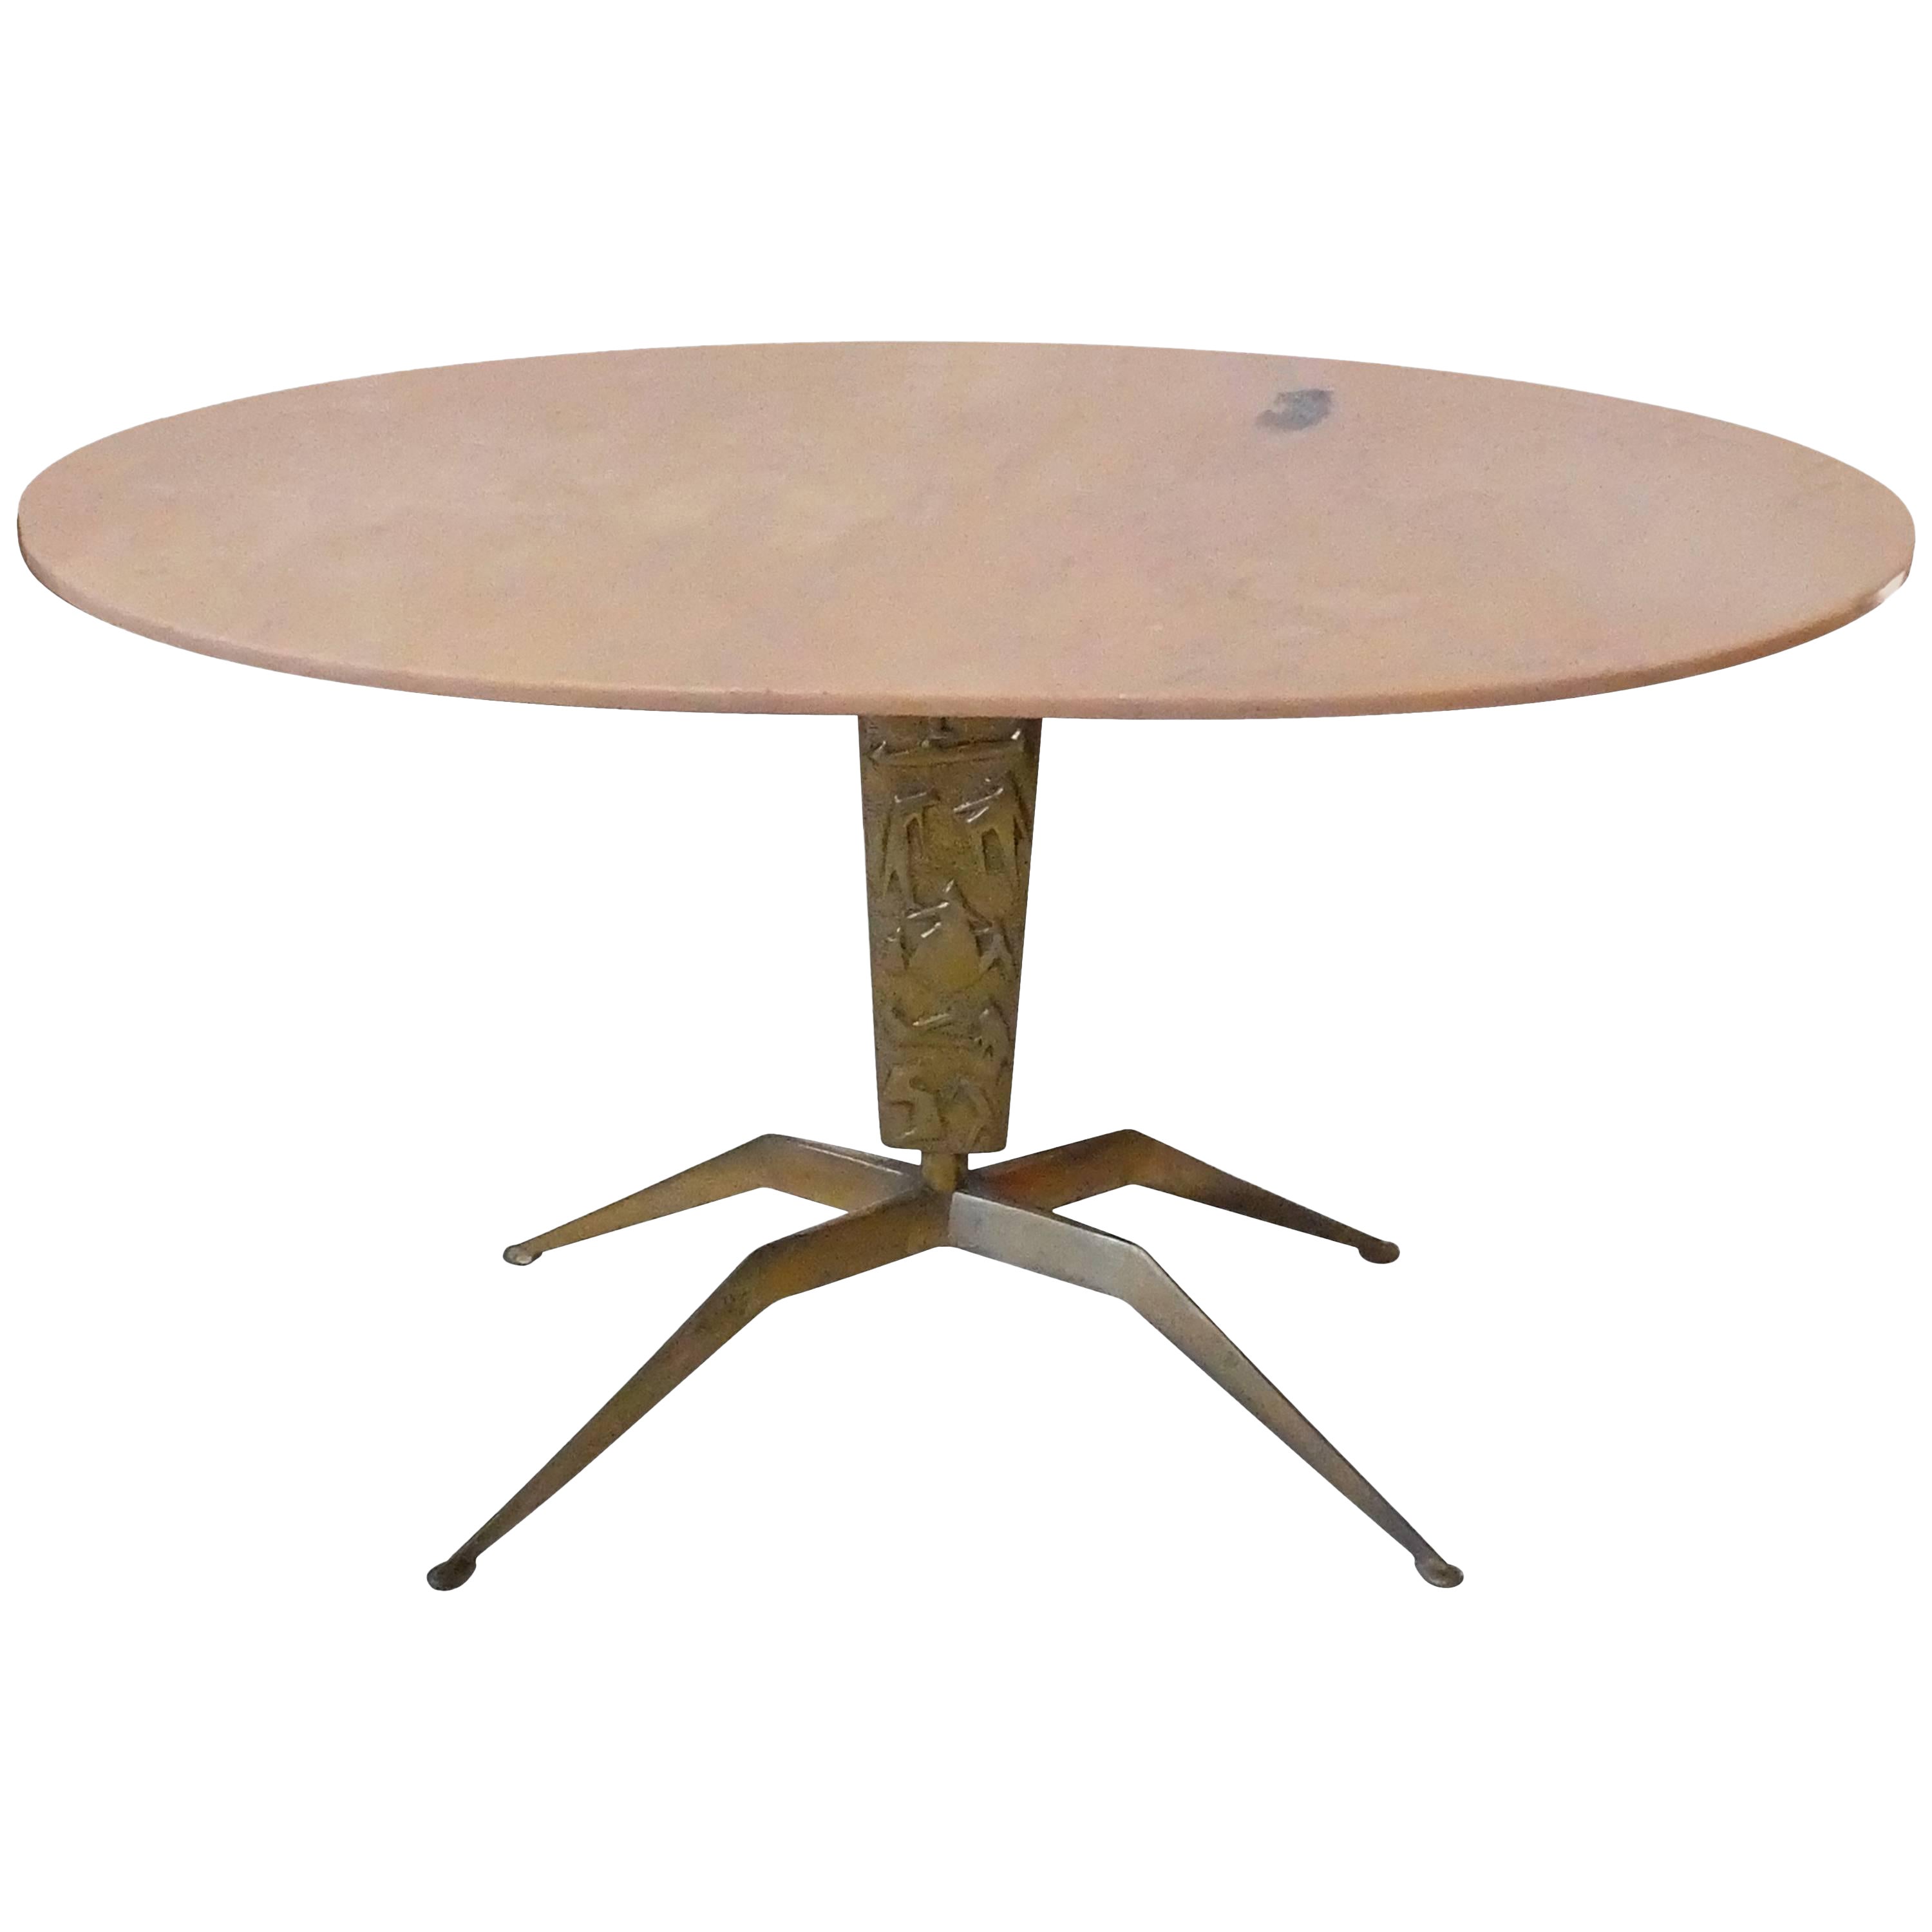 Italian Mid-Century Modern, Oval Marble and Brass Side Table from the 1940s For Sale